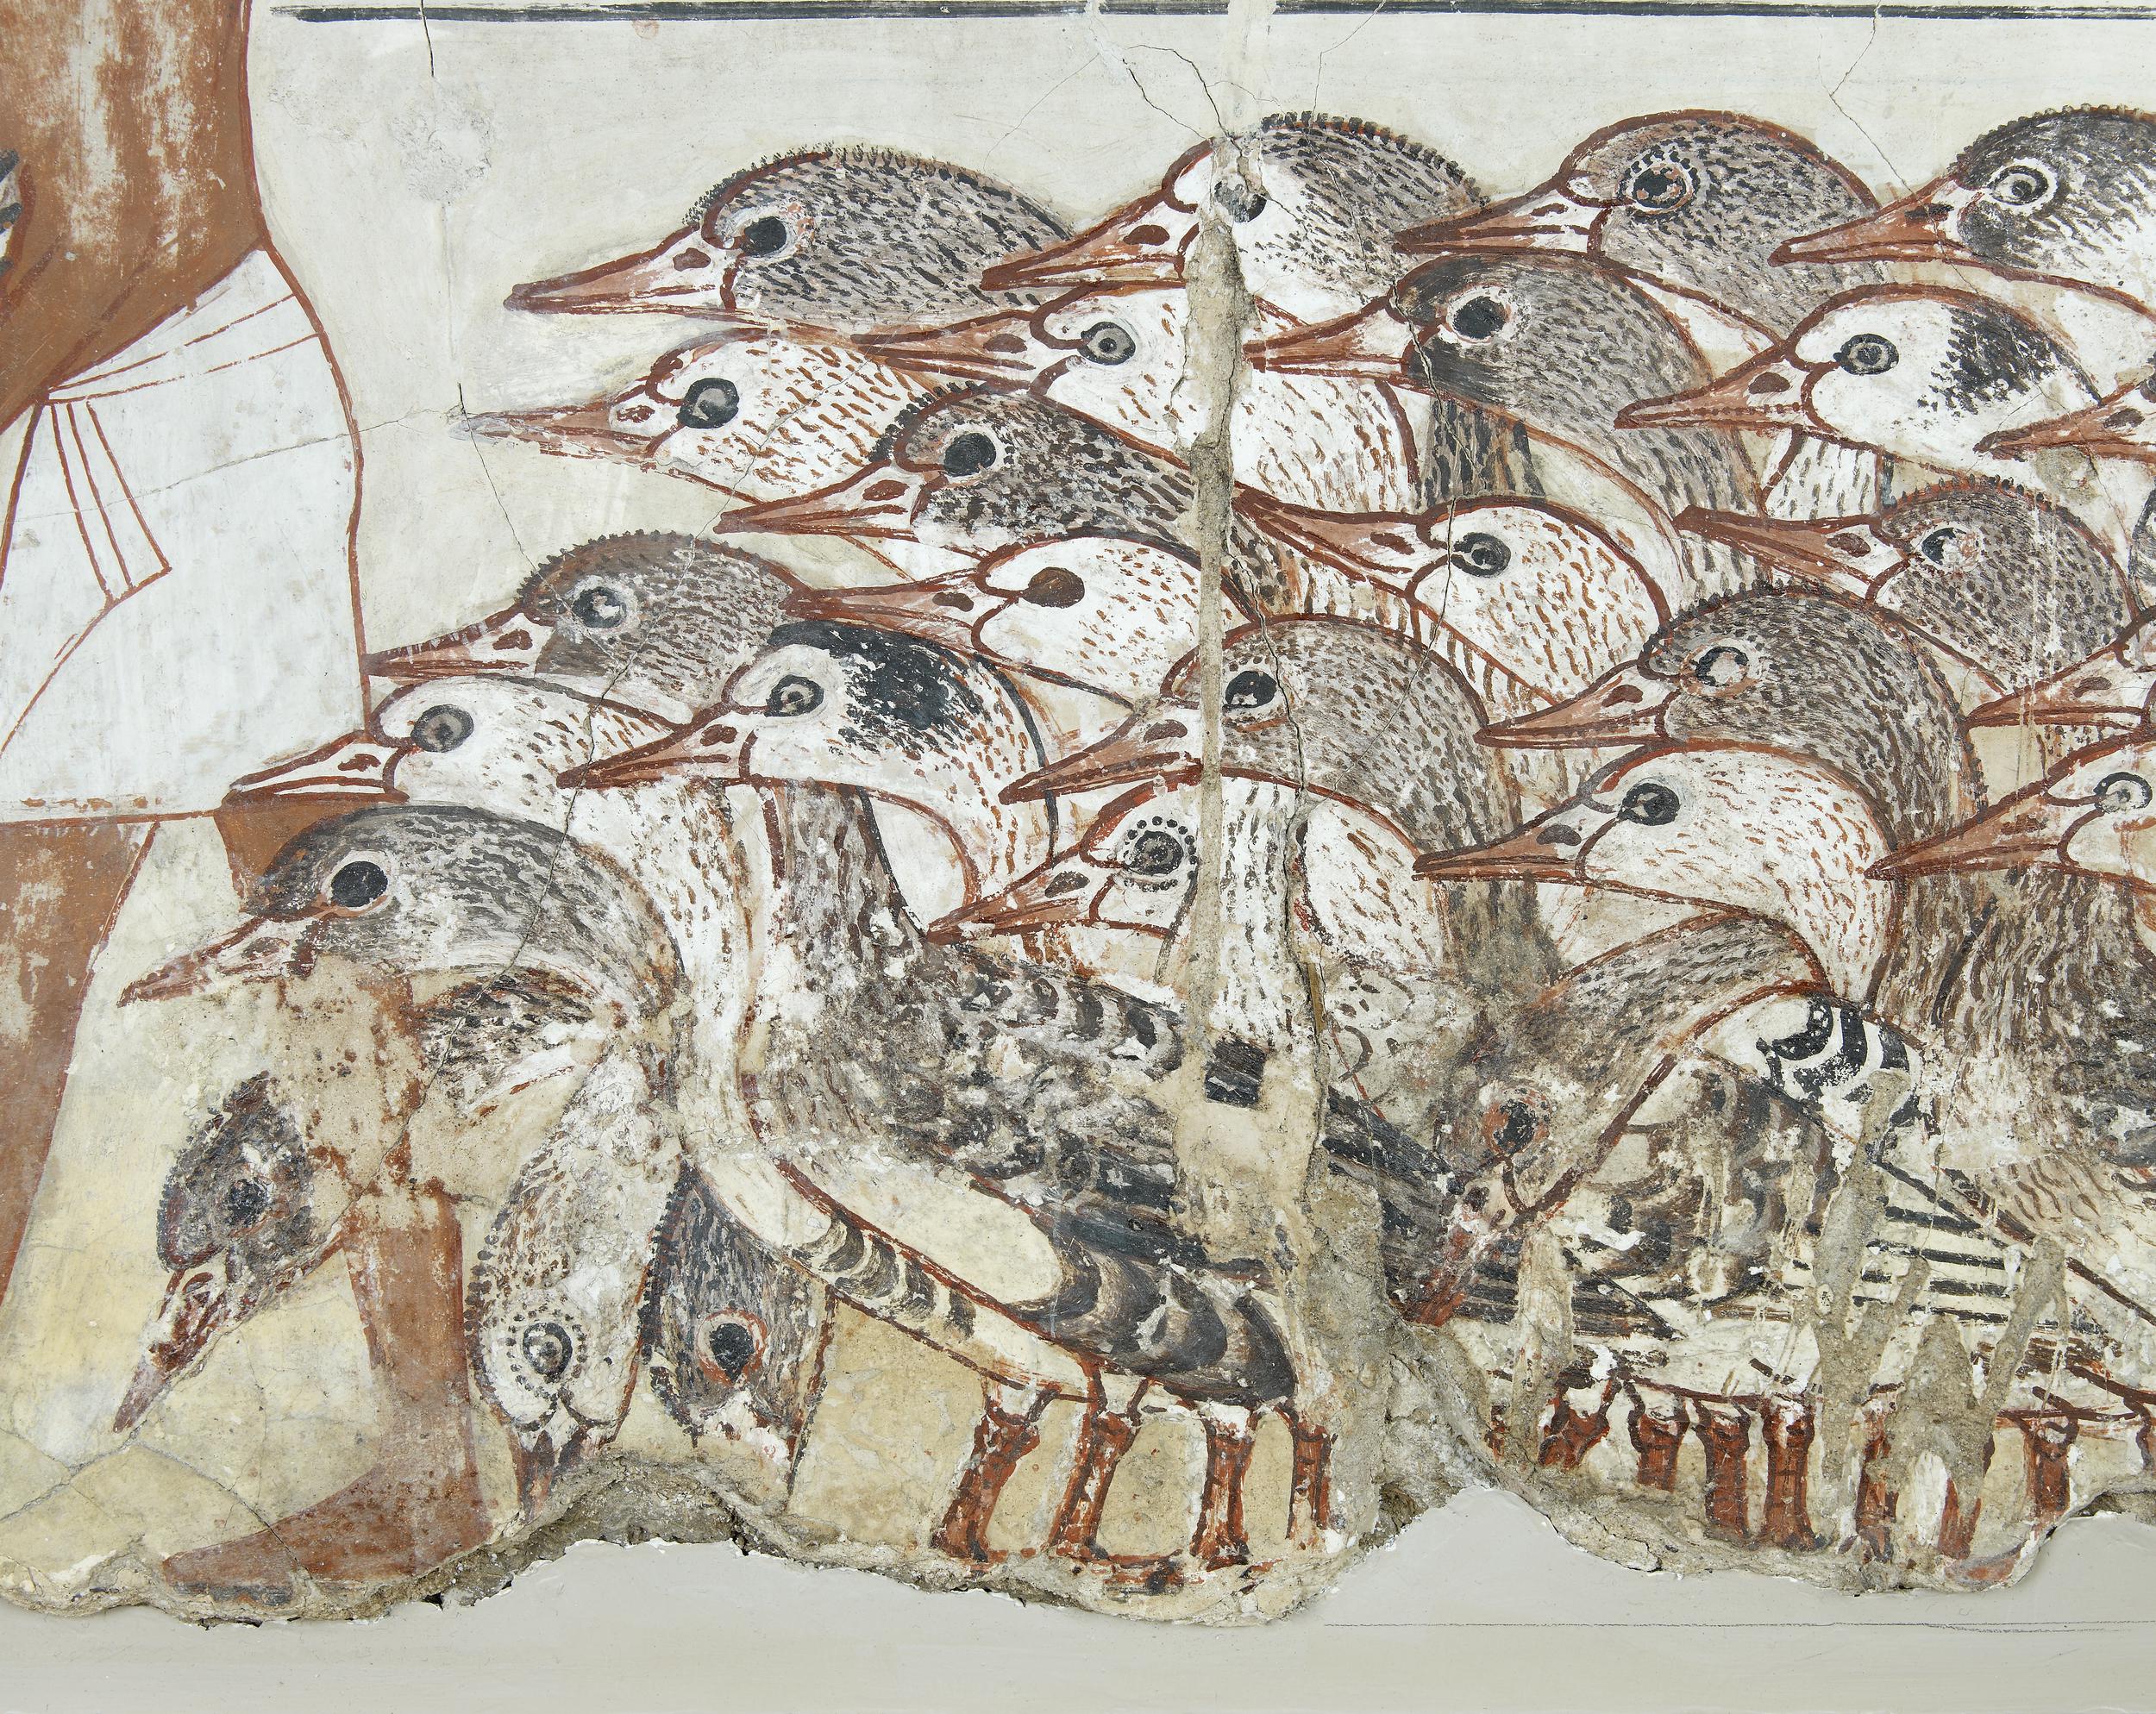 Geese (detail), Nebamun's Geese, Tomb-chapel of Nebamun, c. 1350 B.C.E., 18th Dynasty, paint on plaster, whole fragment: 71 x 115.5 cm, Thebes © Trustees of the British Museum